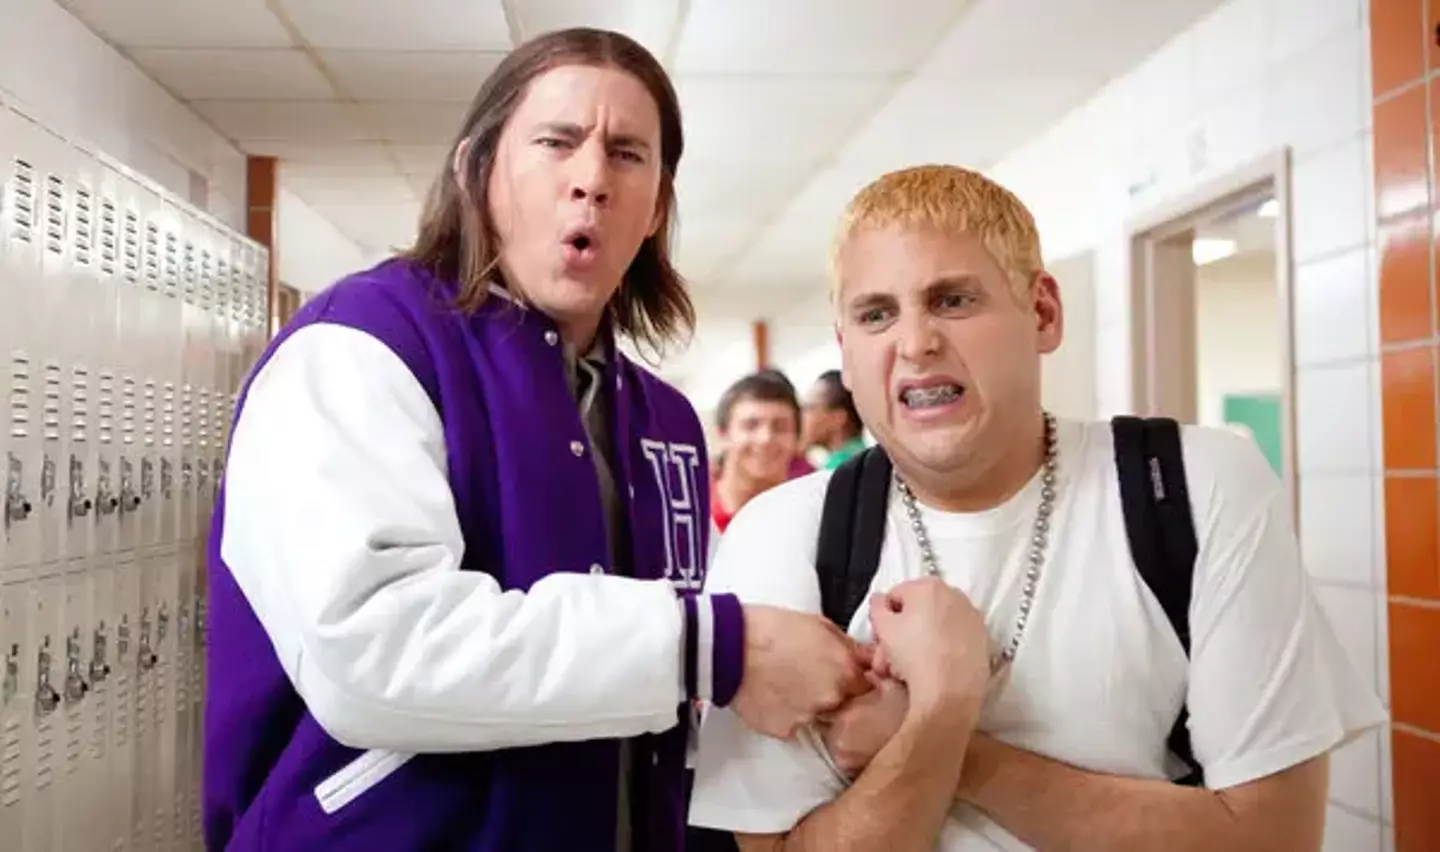 Yes, this film with Jonah Hill and Channing Tatum made him love Jewish people, apparently.